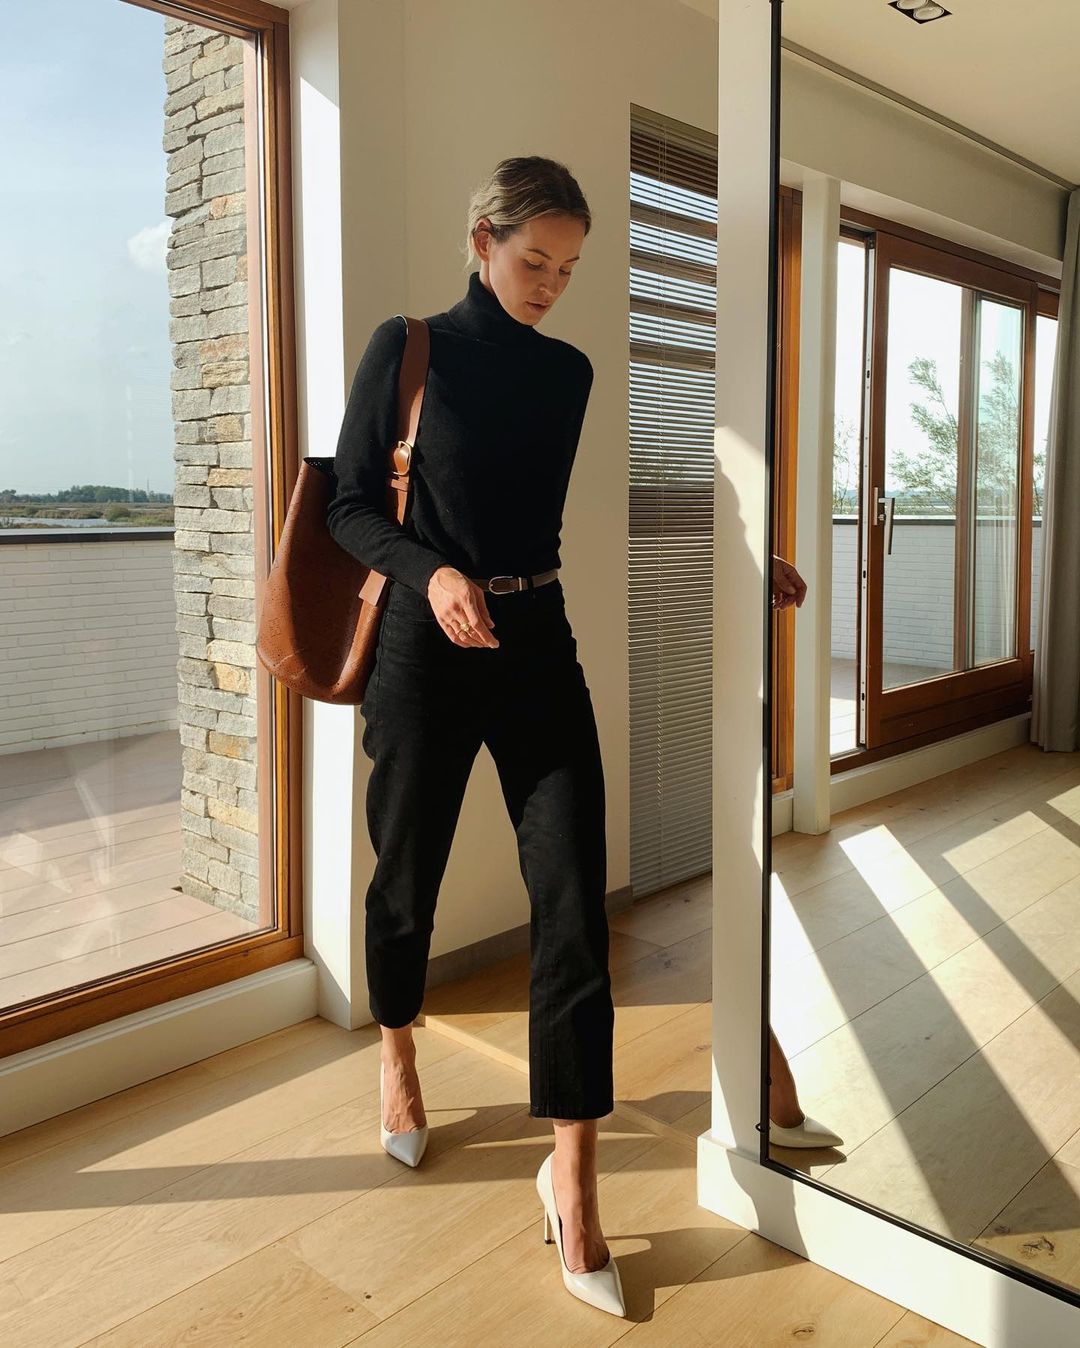 Copy This Chic Fall Look with a Few Classic Pieces — @anoukyve in black turtleneck, brown shoulder bag, black straight-leg jeans, and white heels